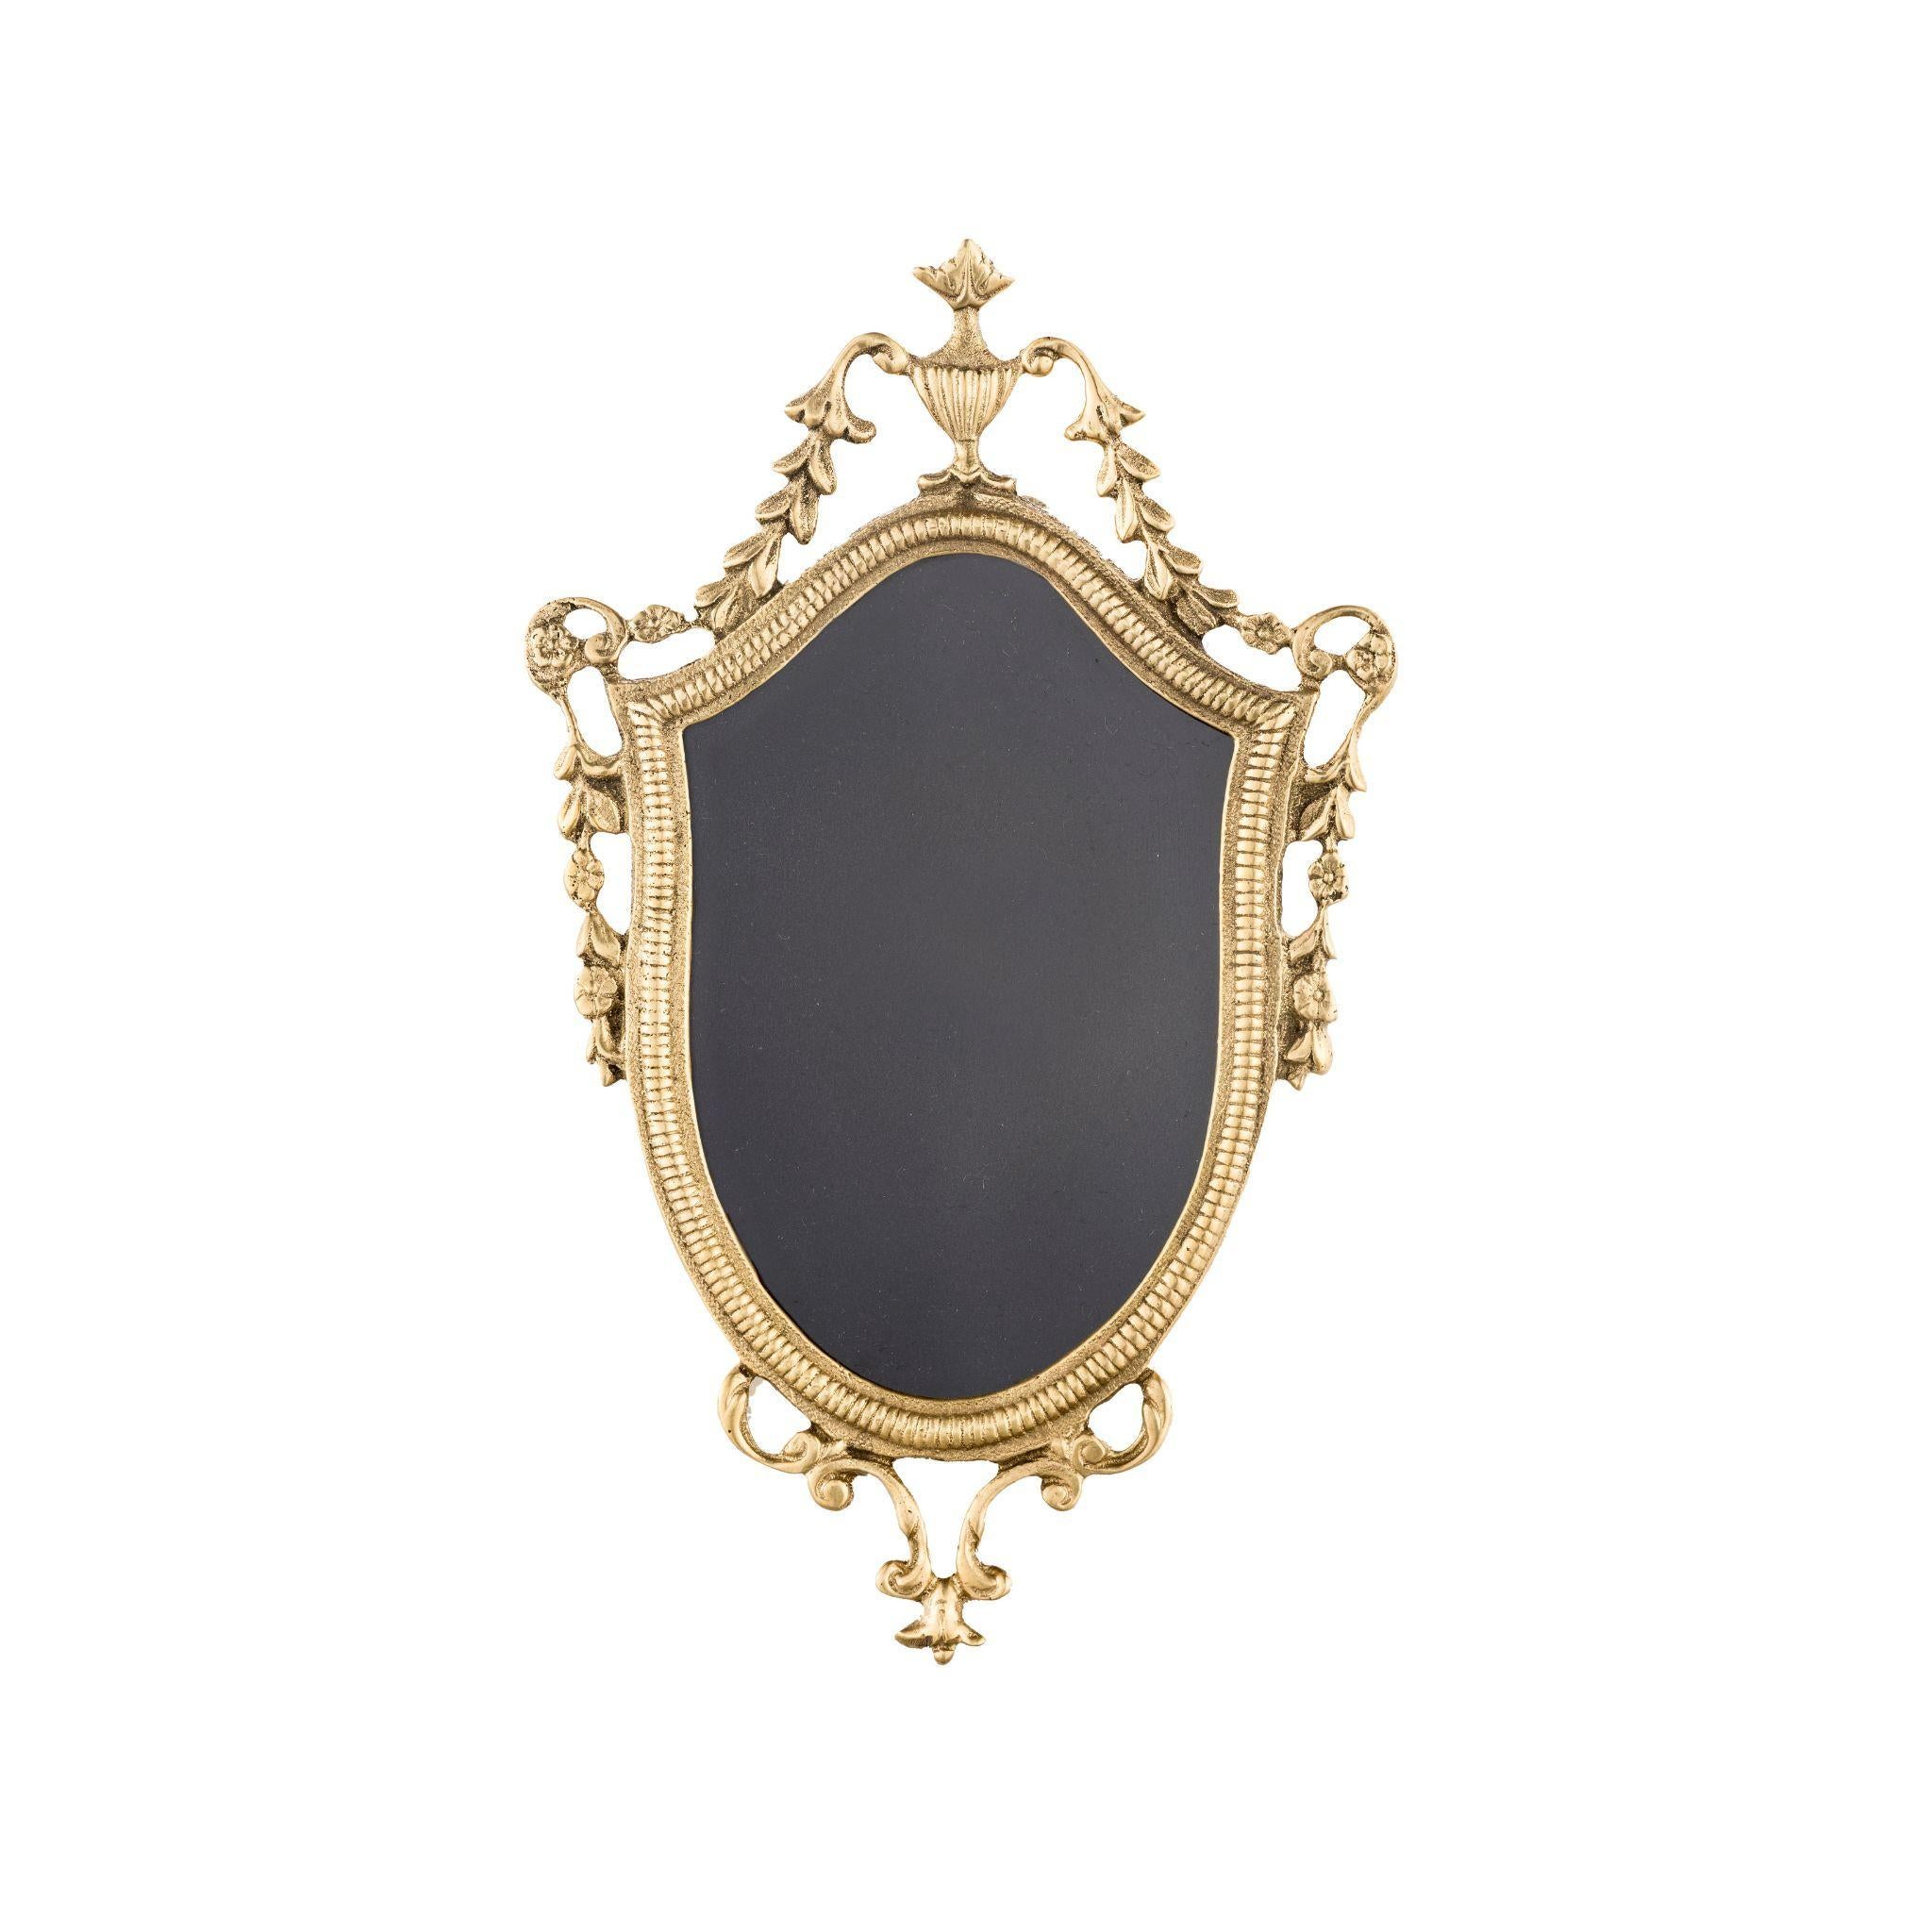 Enhance the beauty of your treasured photos with our stunning decorated Baroque style brass frame. Crafted from high-quality brass, this exquisite frame features intricate details and a classic baroque-style design that adds a touch of elegance to